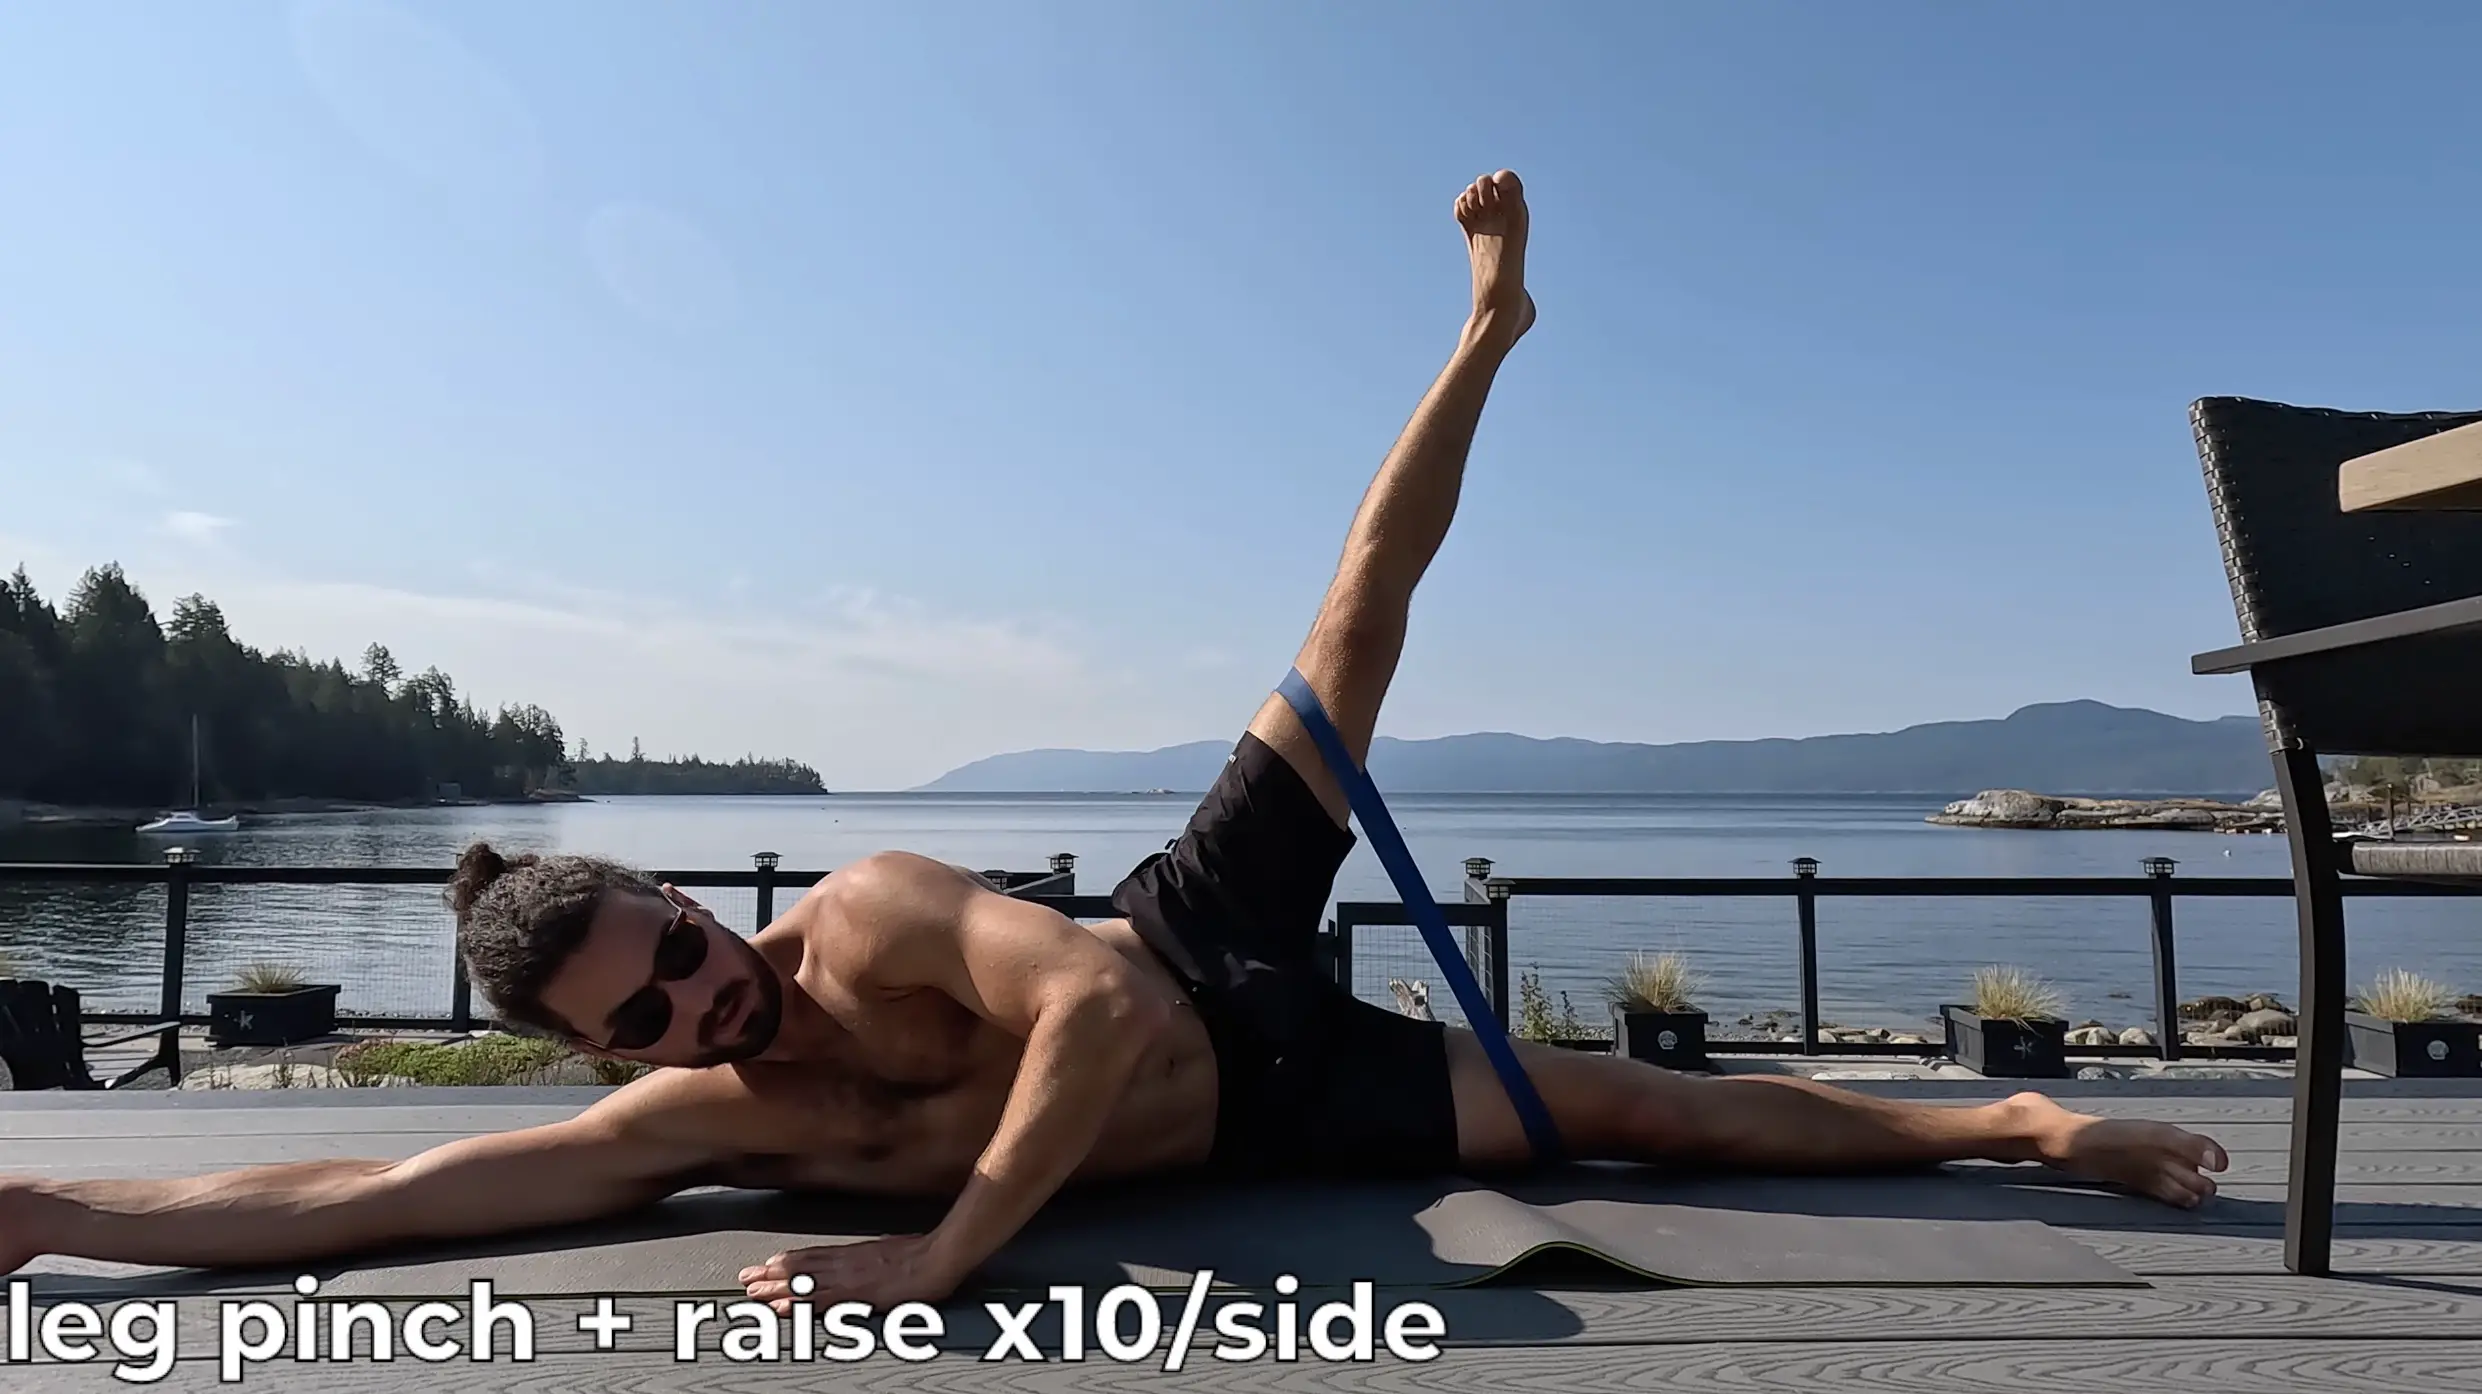 Sideways raise - a great exercise to fix knee pain, strengthen muscles and increase flexibility 